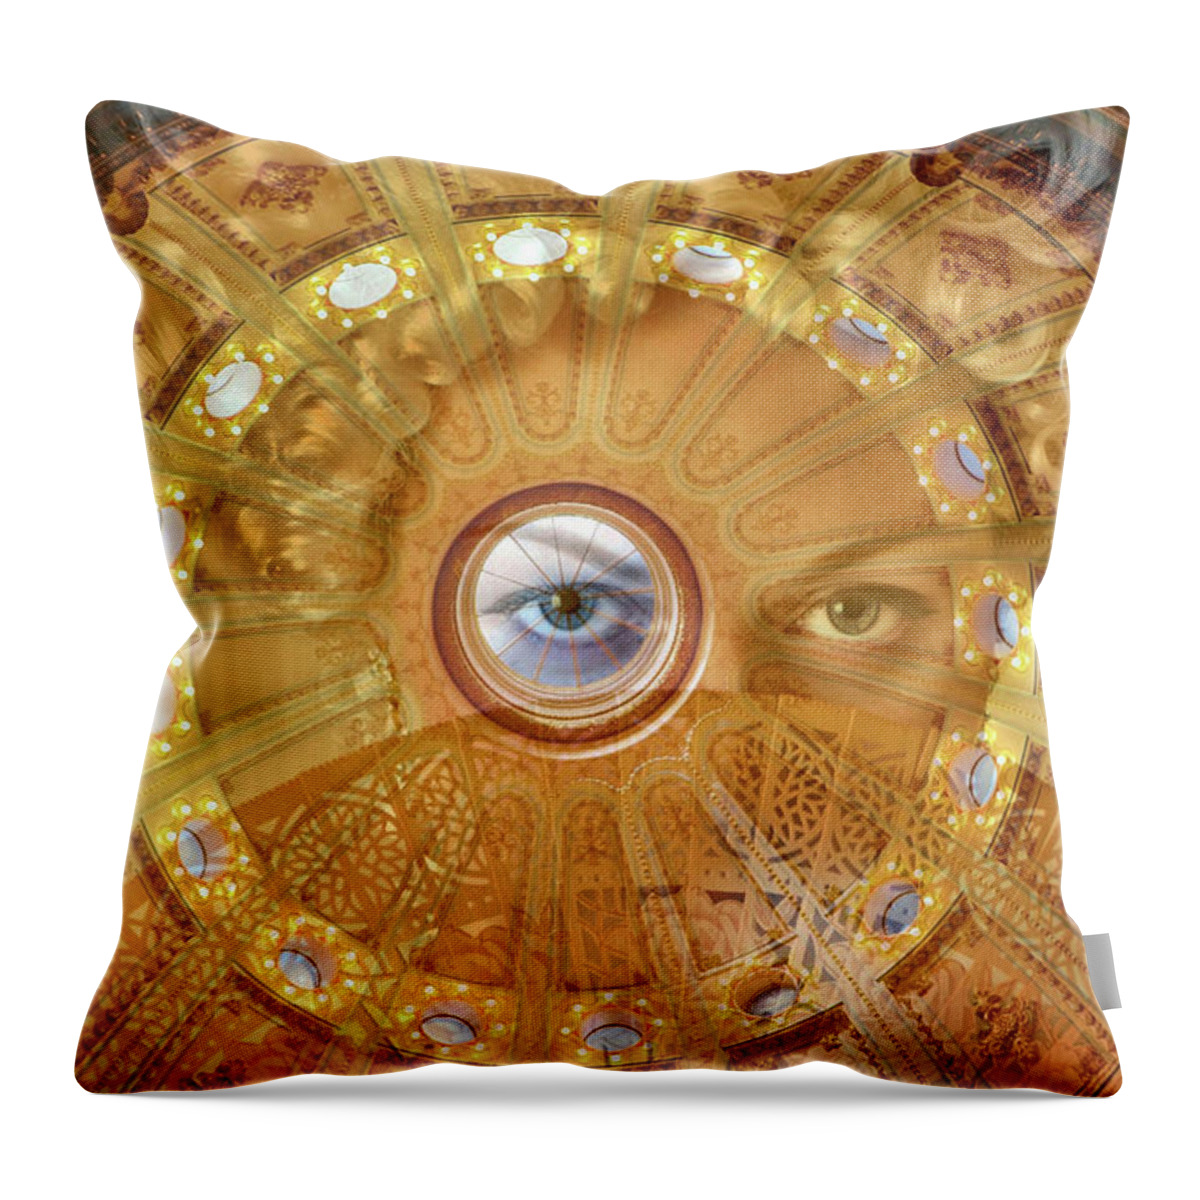 Sci-fi Throw Pillow featuring the photograph I Spy... by Marilyn MacCrakin